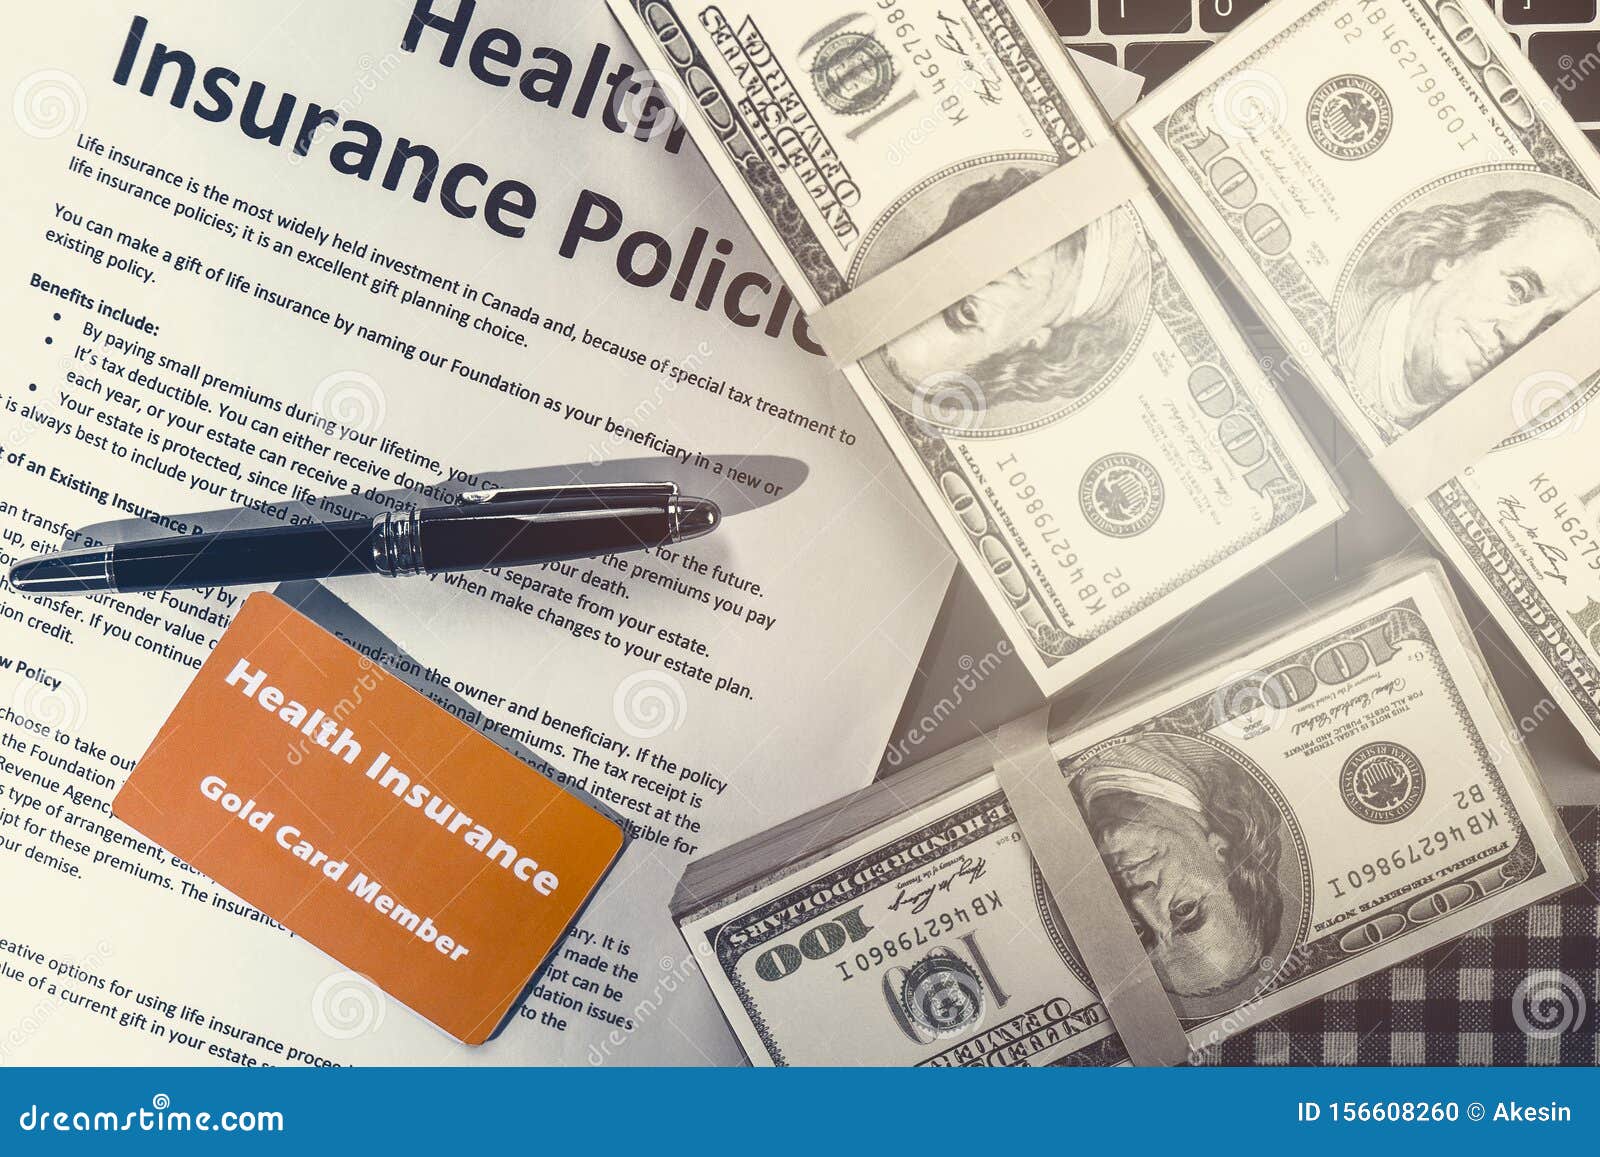 Background Of Health Insurance Gold Card Member With Pen On Health Insurance Policy Document And ...